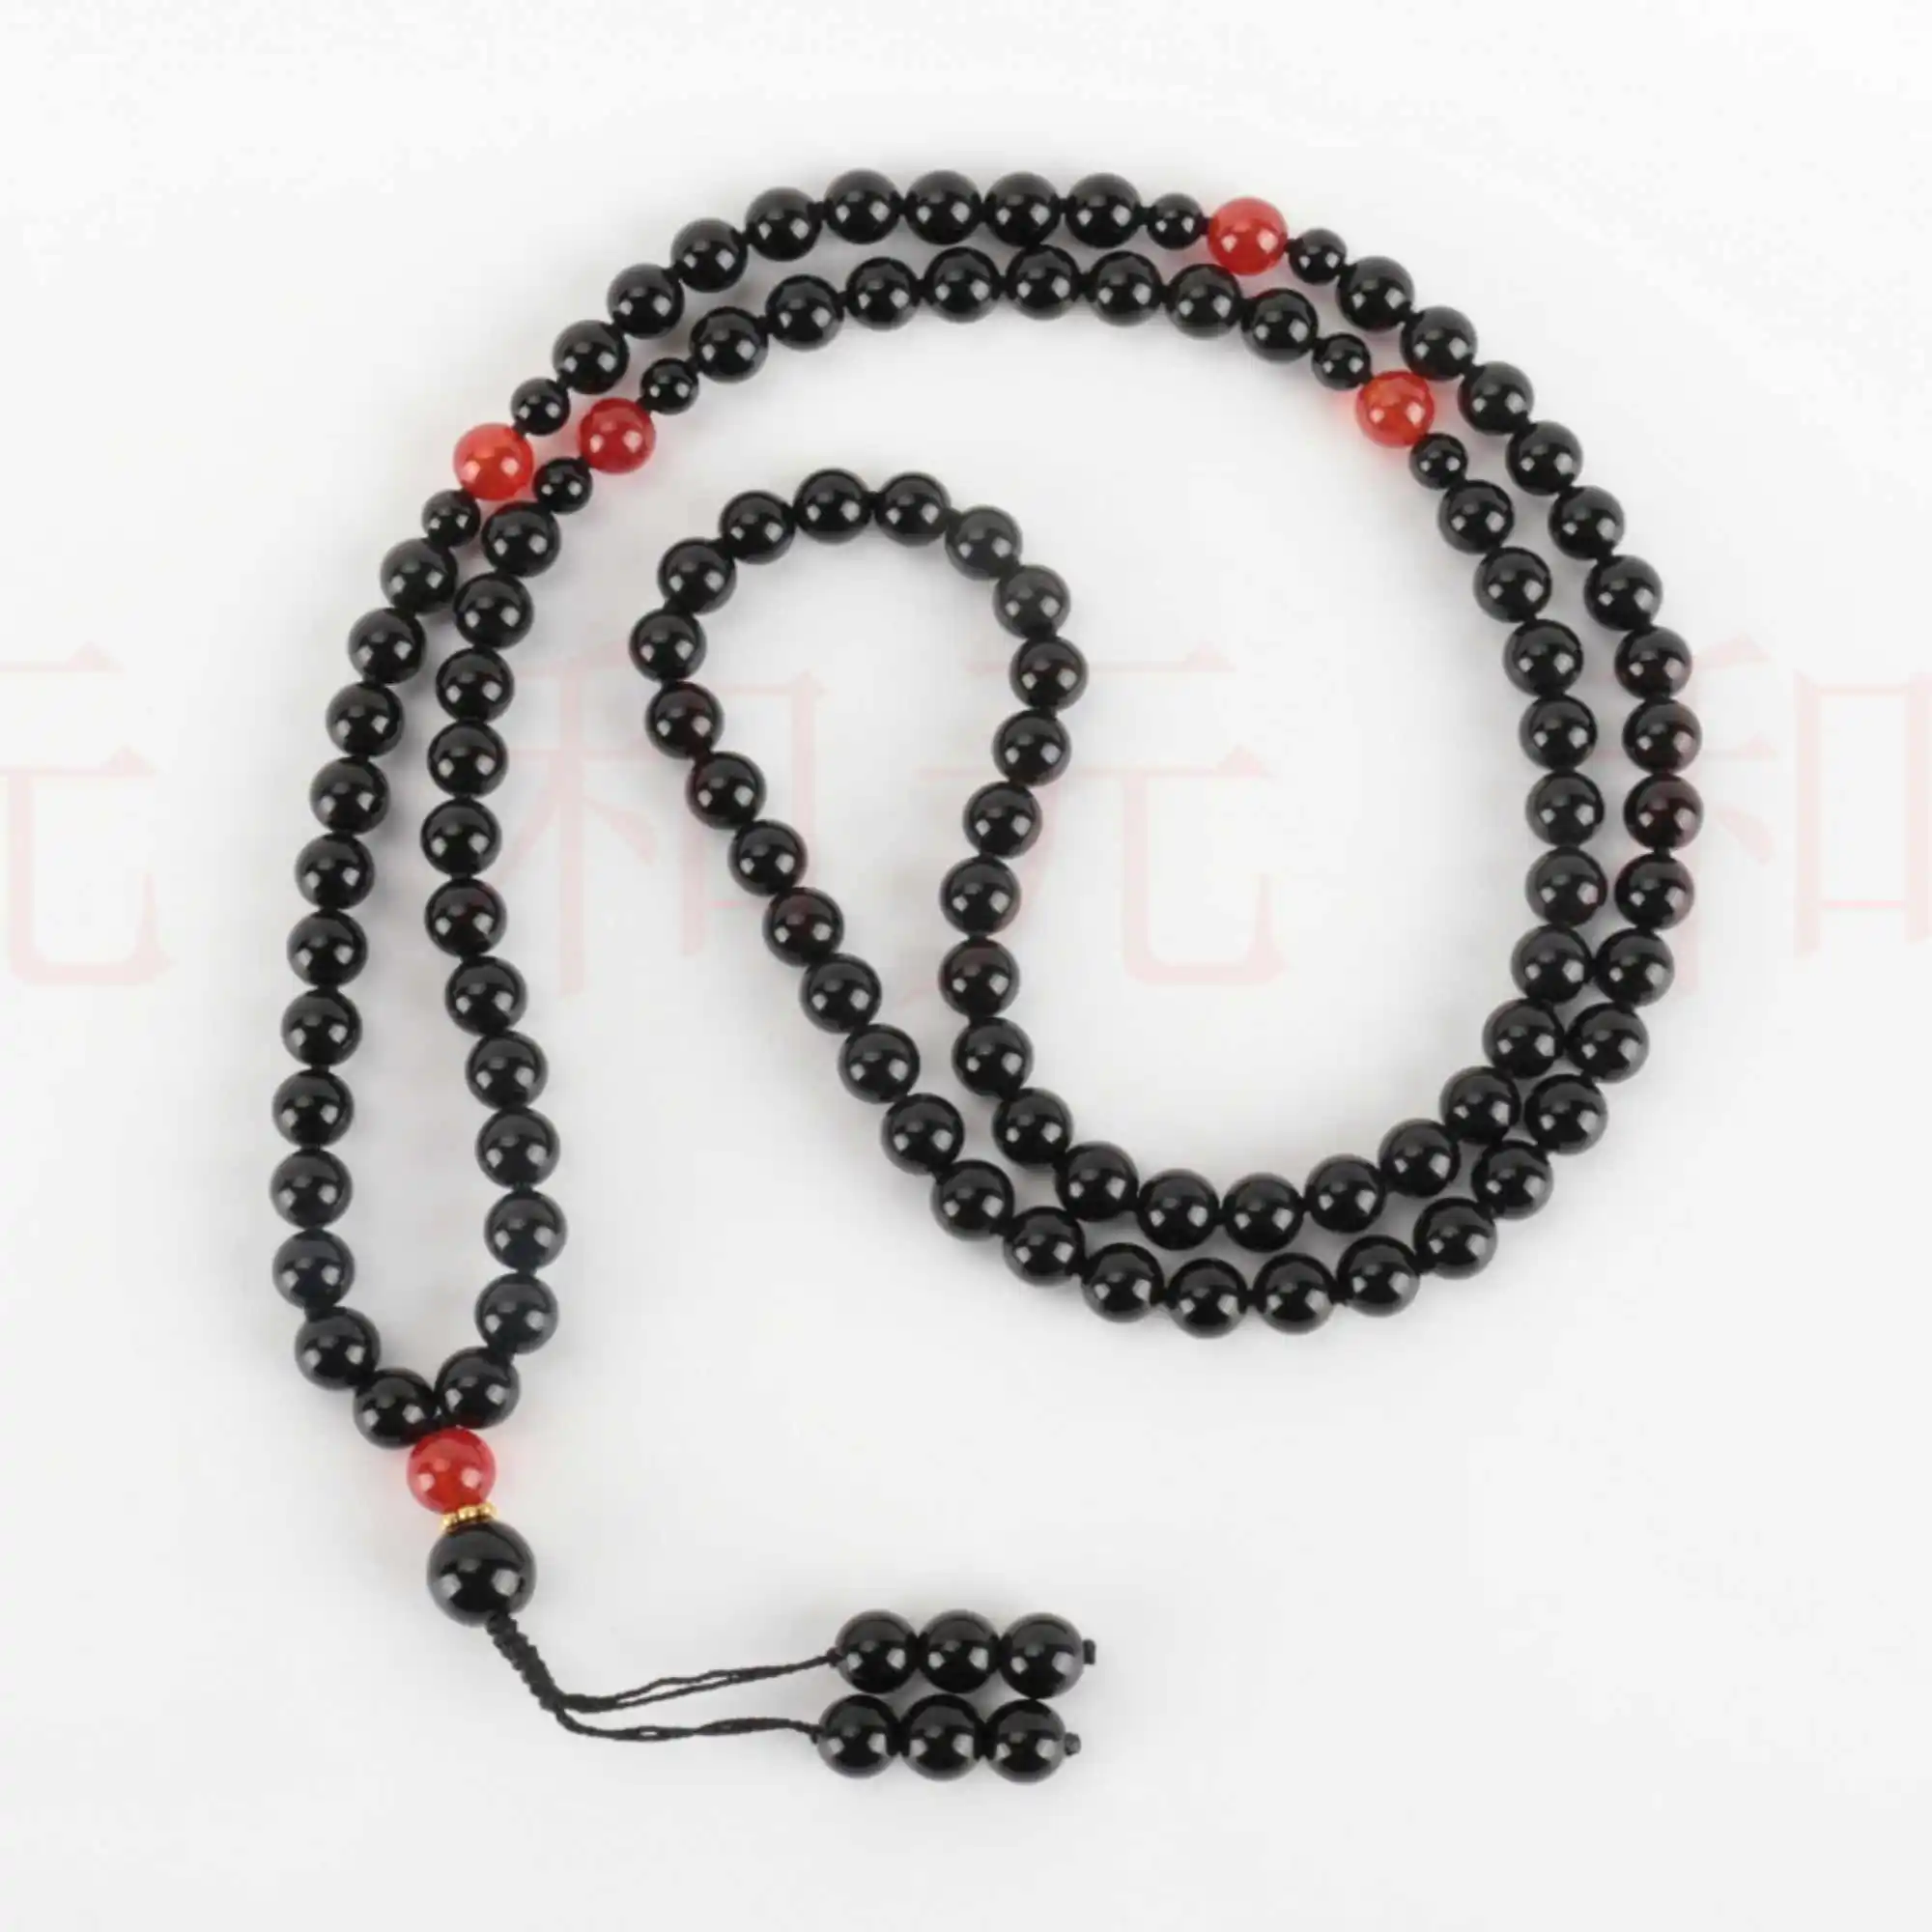 

8mm 108 Natural Obsidian red Crystal gemstone beads necklace Bohemia Fancy Colorful Souvenir Emotional Pray Christmas Classic